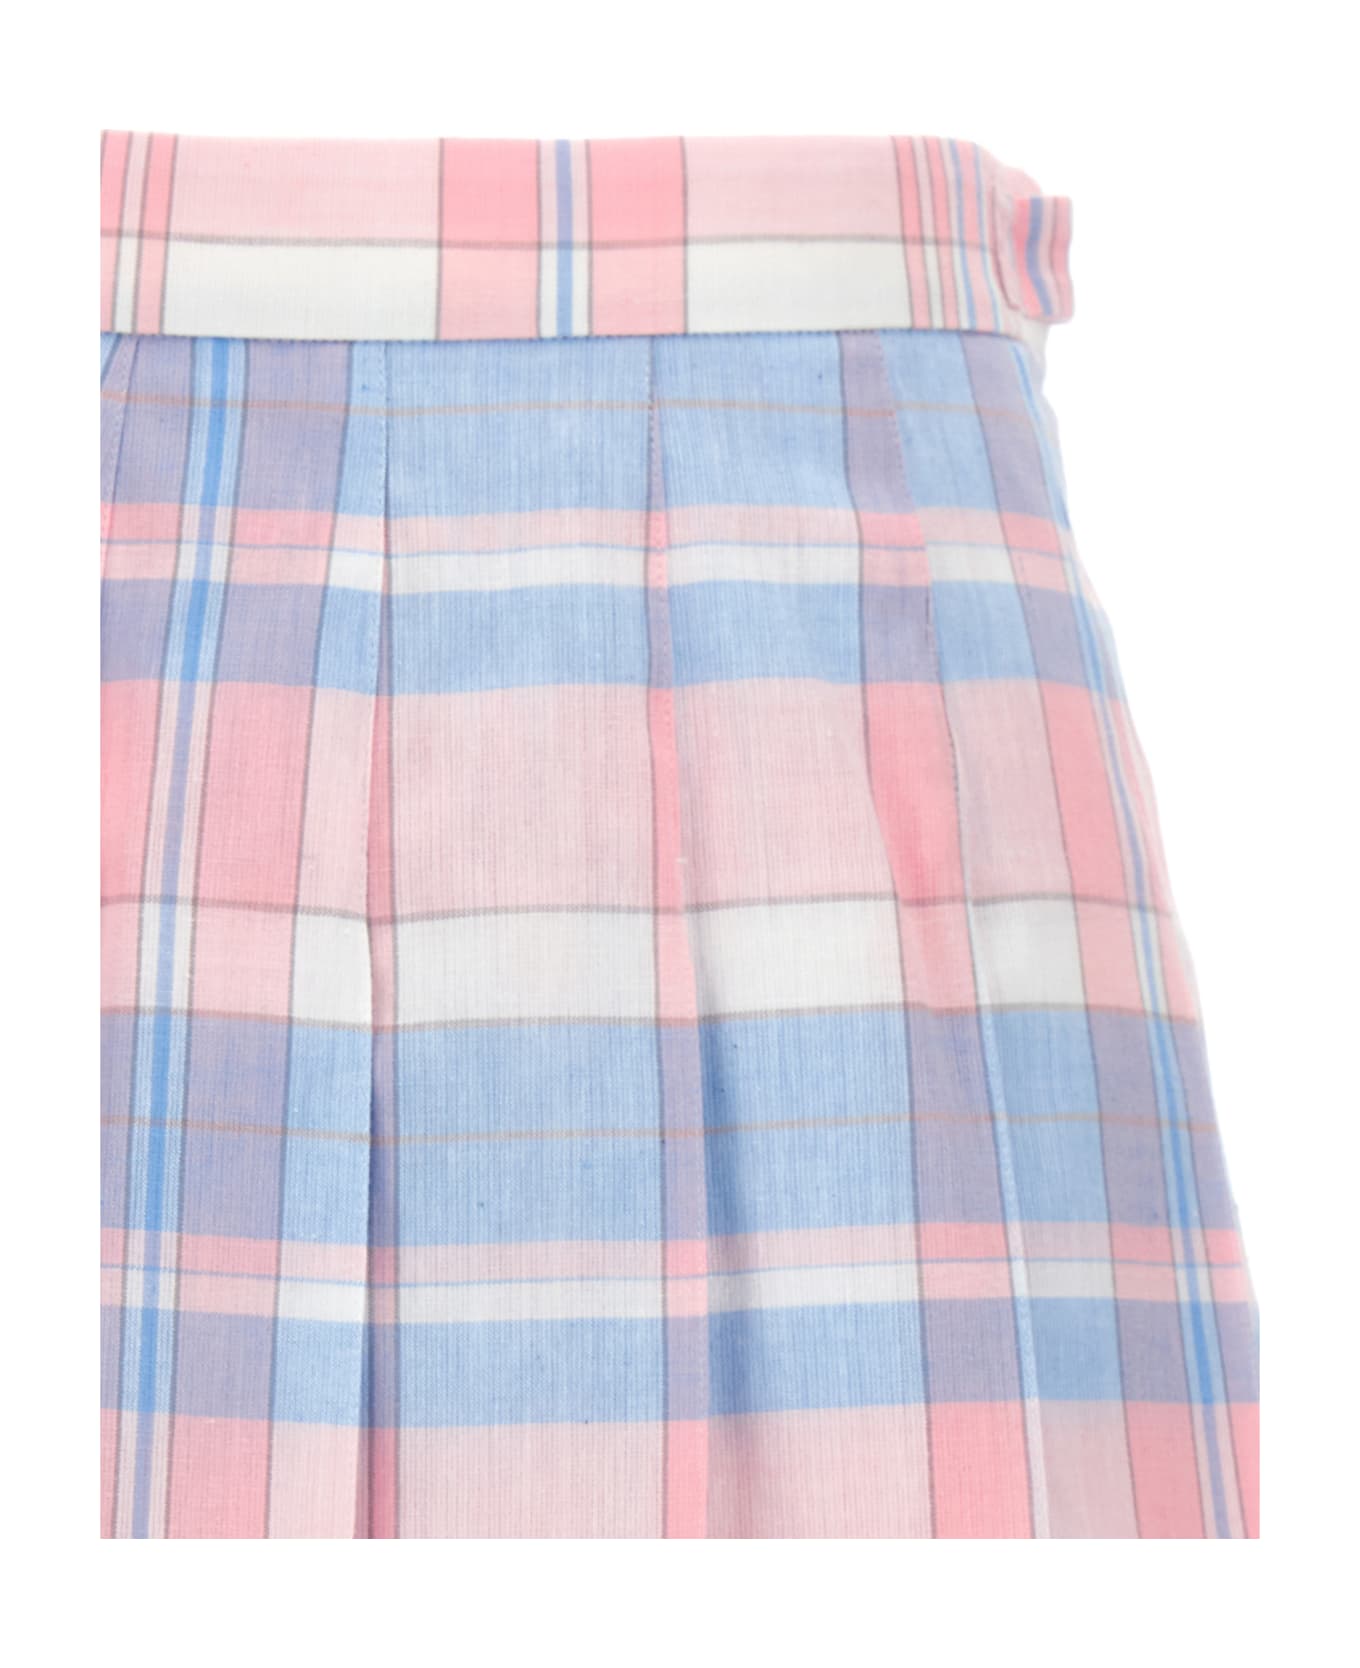 Thom Browne Check Pleated Skirt - Multicolor